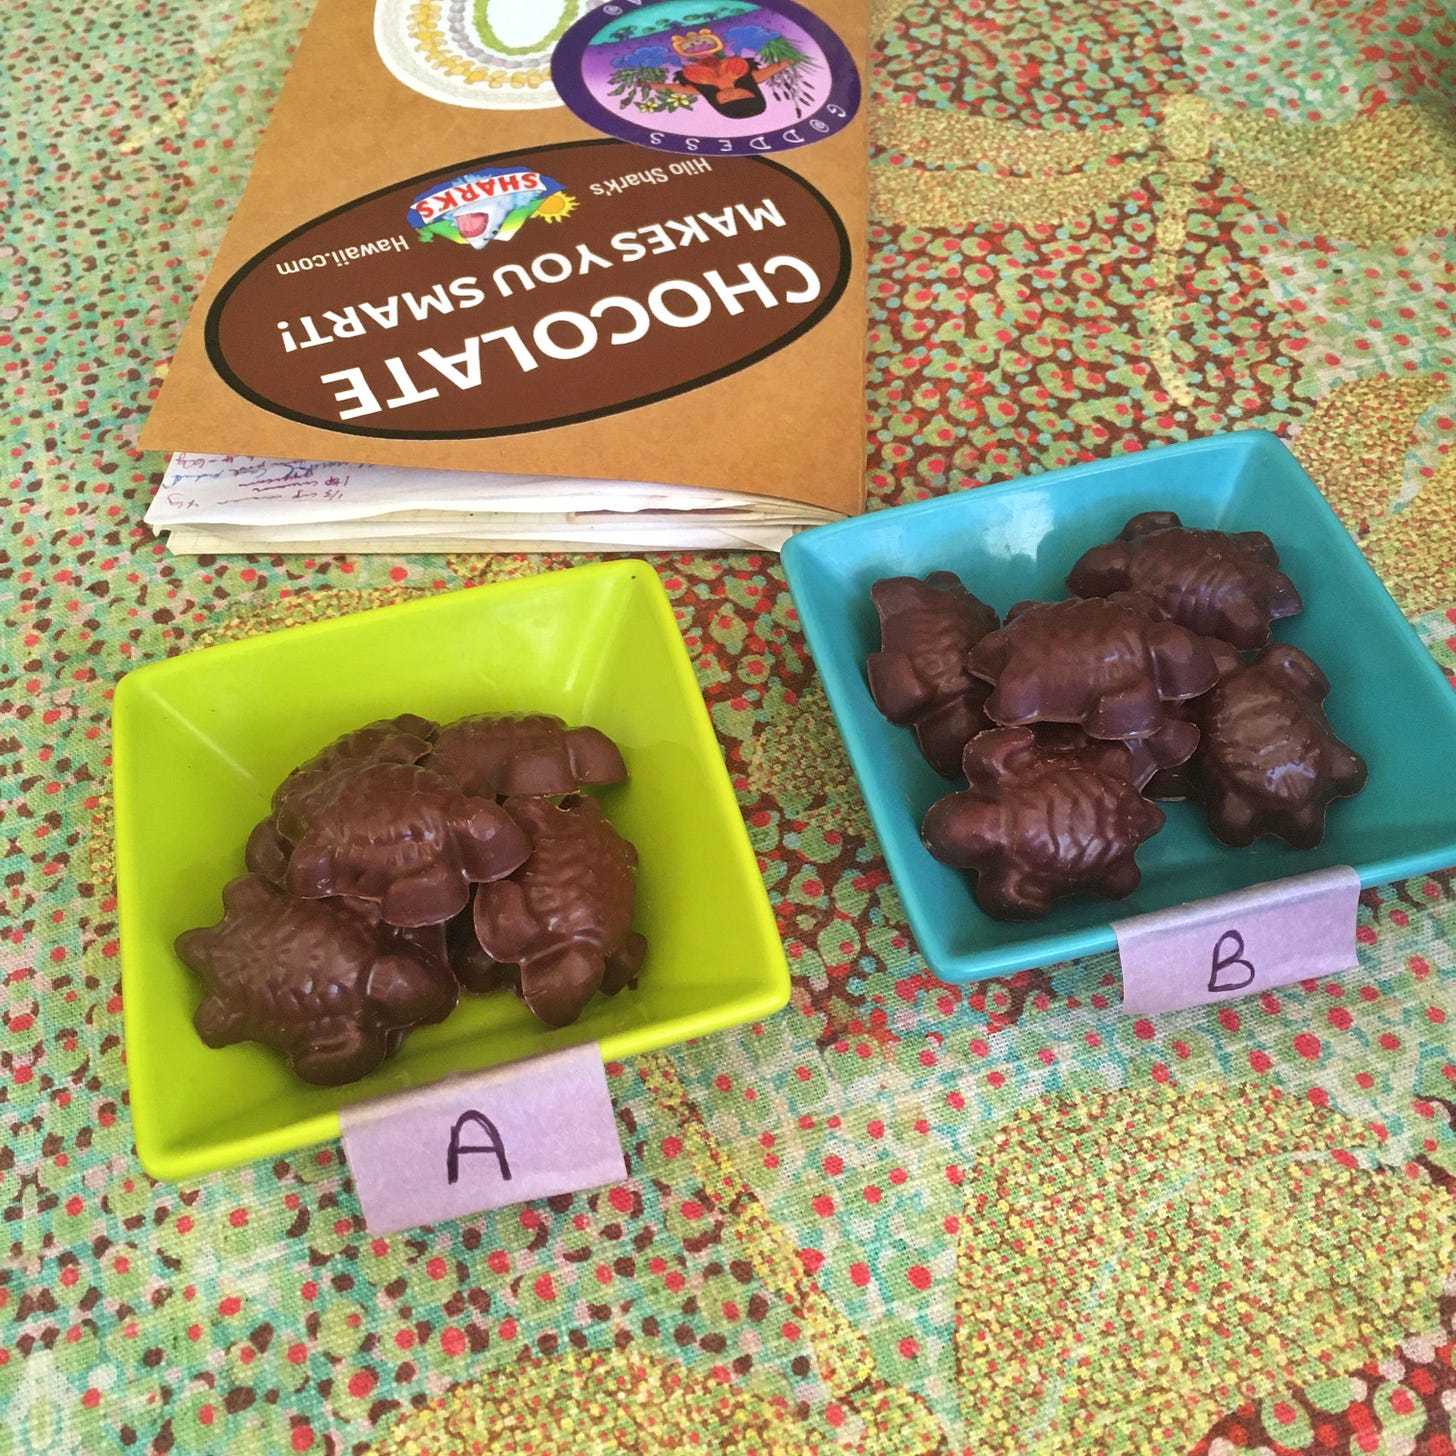 Two square bowls of turtle shaped chocolate labeled a and b with notebook